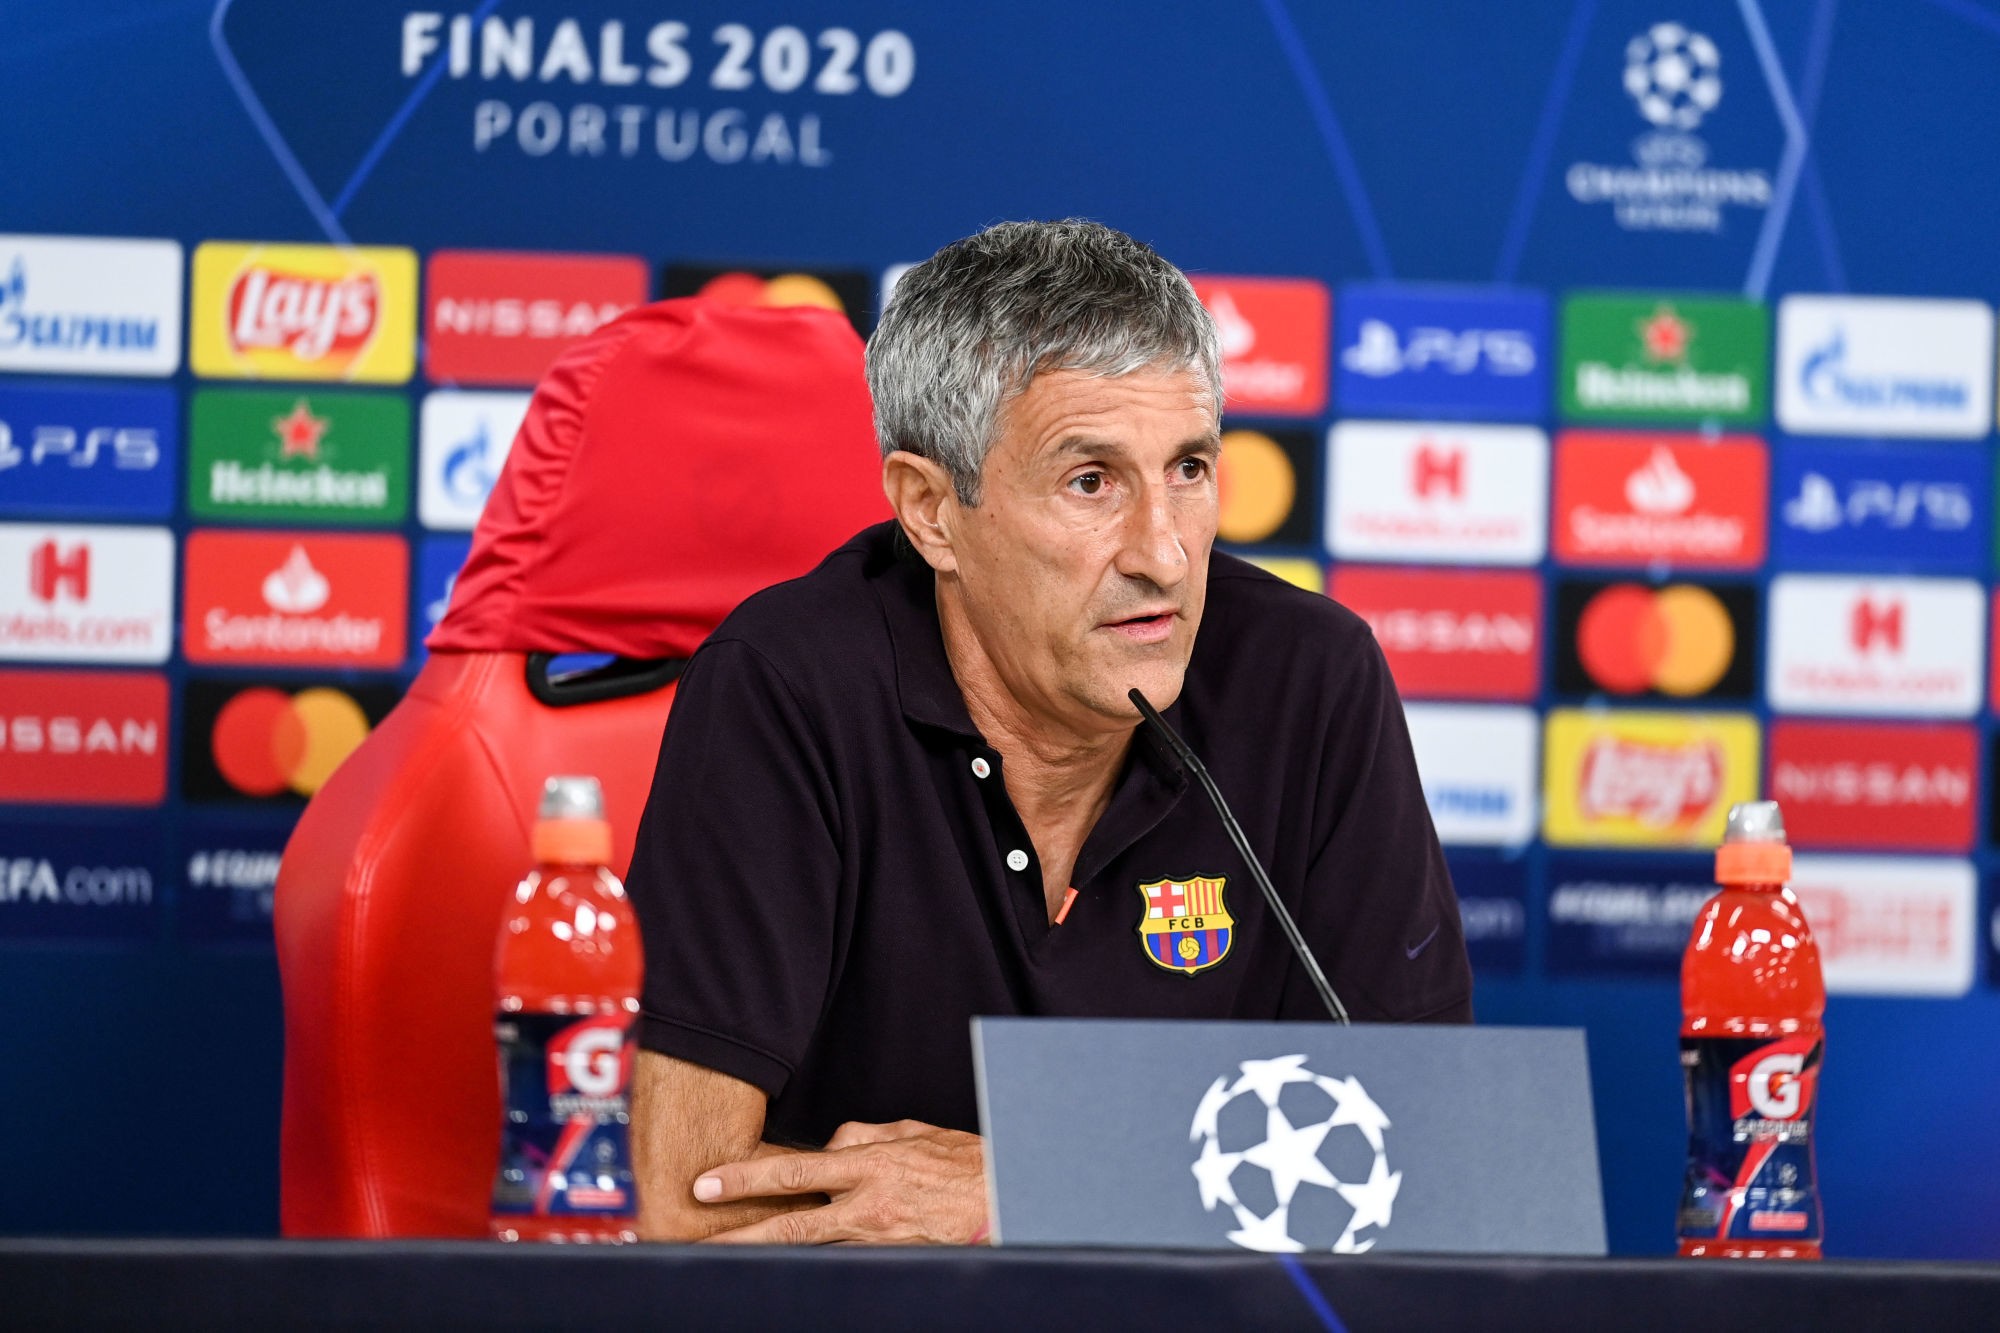 LISBON, PORTUGAL - AUGUST 13: In this handout image provided by UEFA, Quique Setien, Manager of FC Barcelona speaks to the media during a press conference ahead of their UEFA Champions League quarter-final match against Bayern Munich at Estadio do Sport Lisboa e Benfica on August 13, 2020 in Lisbon, Portugal. (Photo by UEFA - Handout/UEFA via Getty Images) 

Photo by Icon Sport - Lisbonne (Portugal)